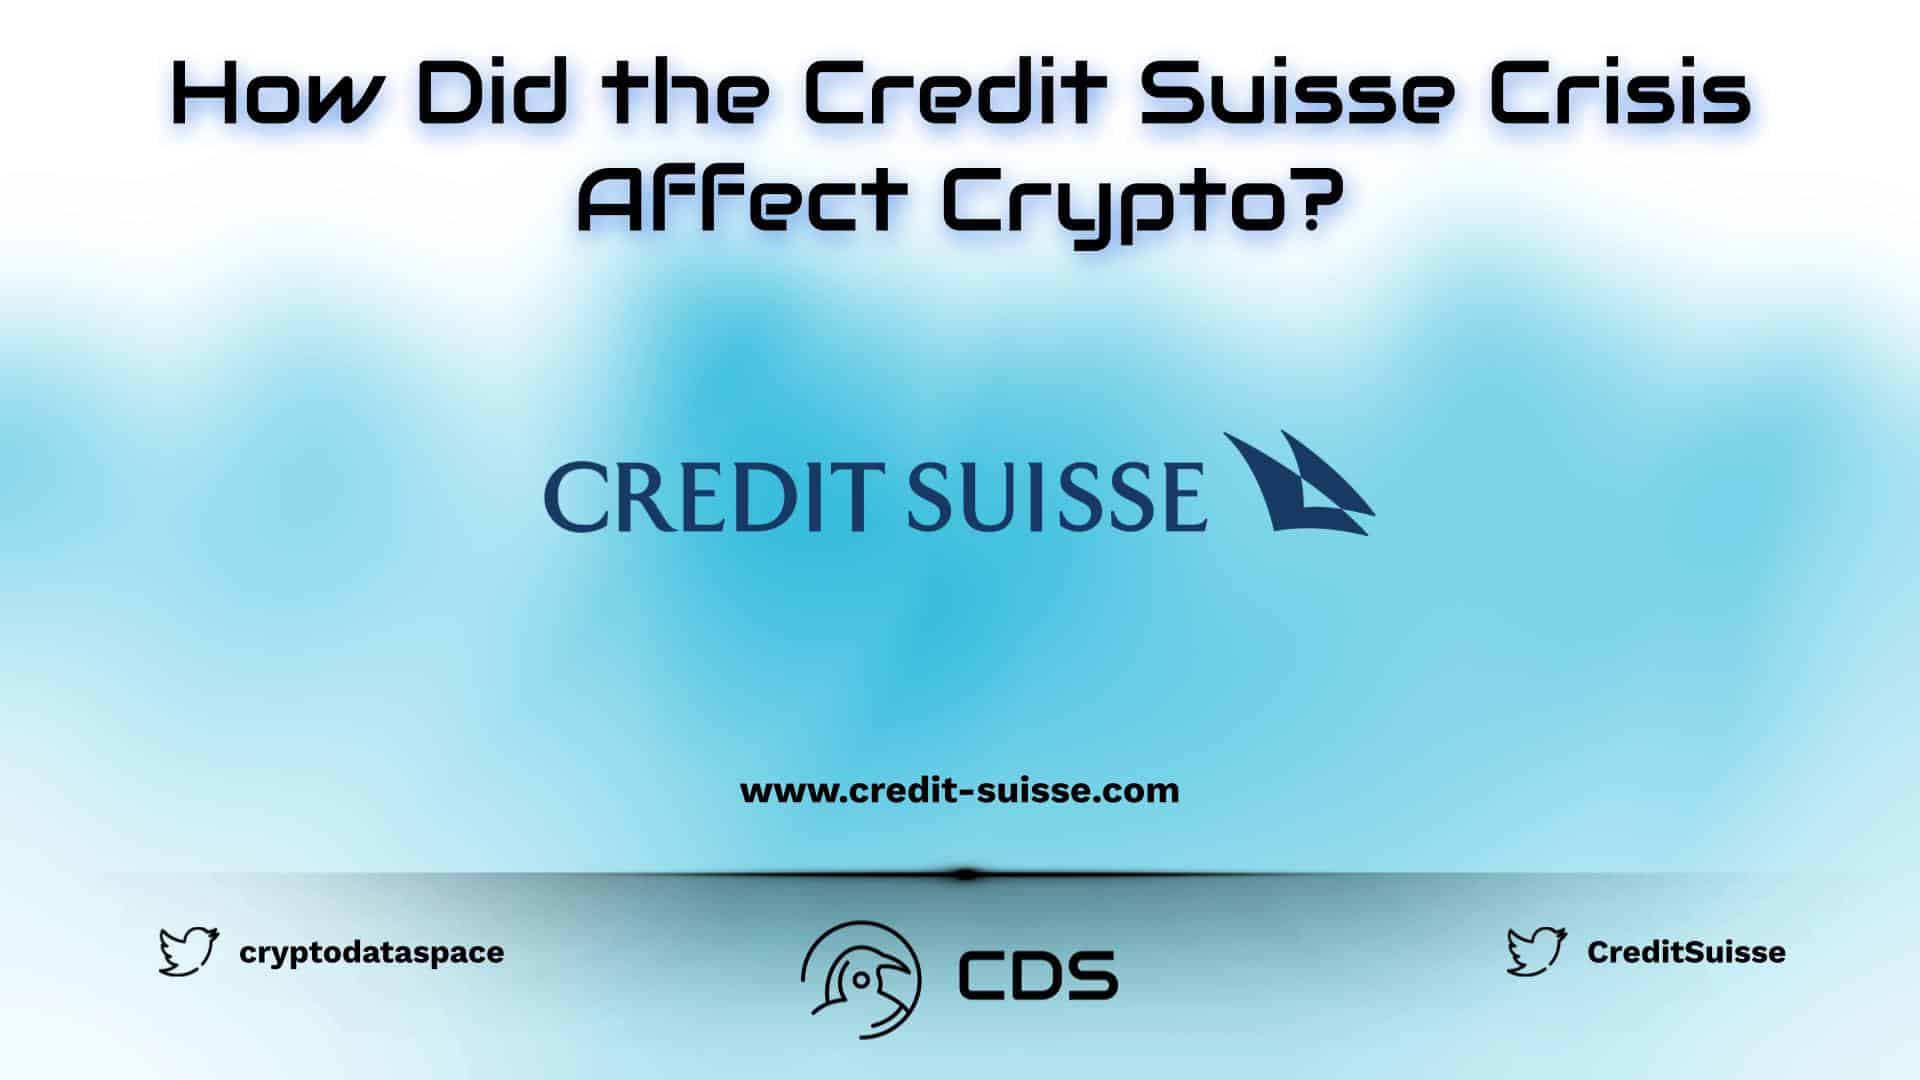 How Did the Credit Suisse Crisis Affect Crypto?